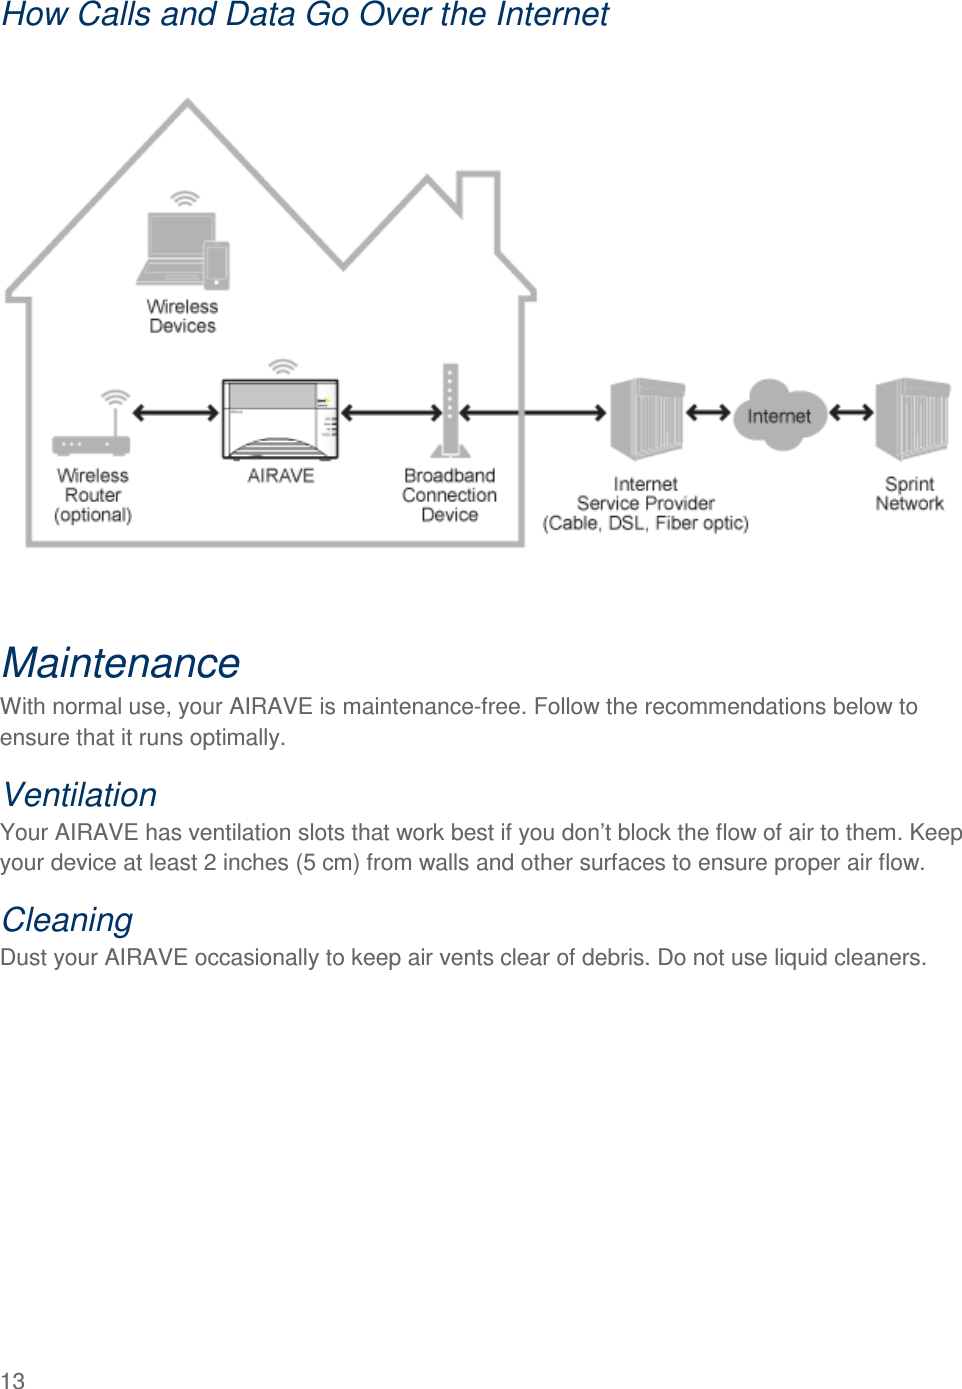  13   How Calls and Data Go Over the Internet    Maintenance With normal use, your AIRAVE is maintenance-free. Follow the recommendations below to ensure that it runs optimally. Ventilation Your AIRAVE has ventilation slots that work best if you don’t block the flow of air to them. Keep your device at least 2 inches (5 cm) from walls and other surfaces to ensure proper air flow. Cleaning Dust your AIRAVE occasionally to keep air vents clear of debris. Do not use liquid cleaners. 